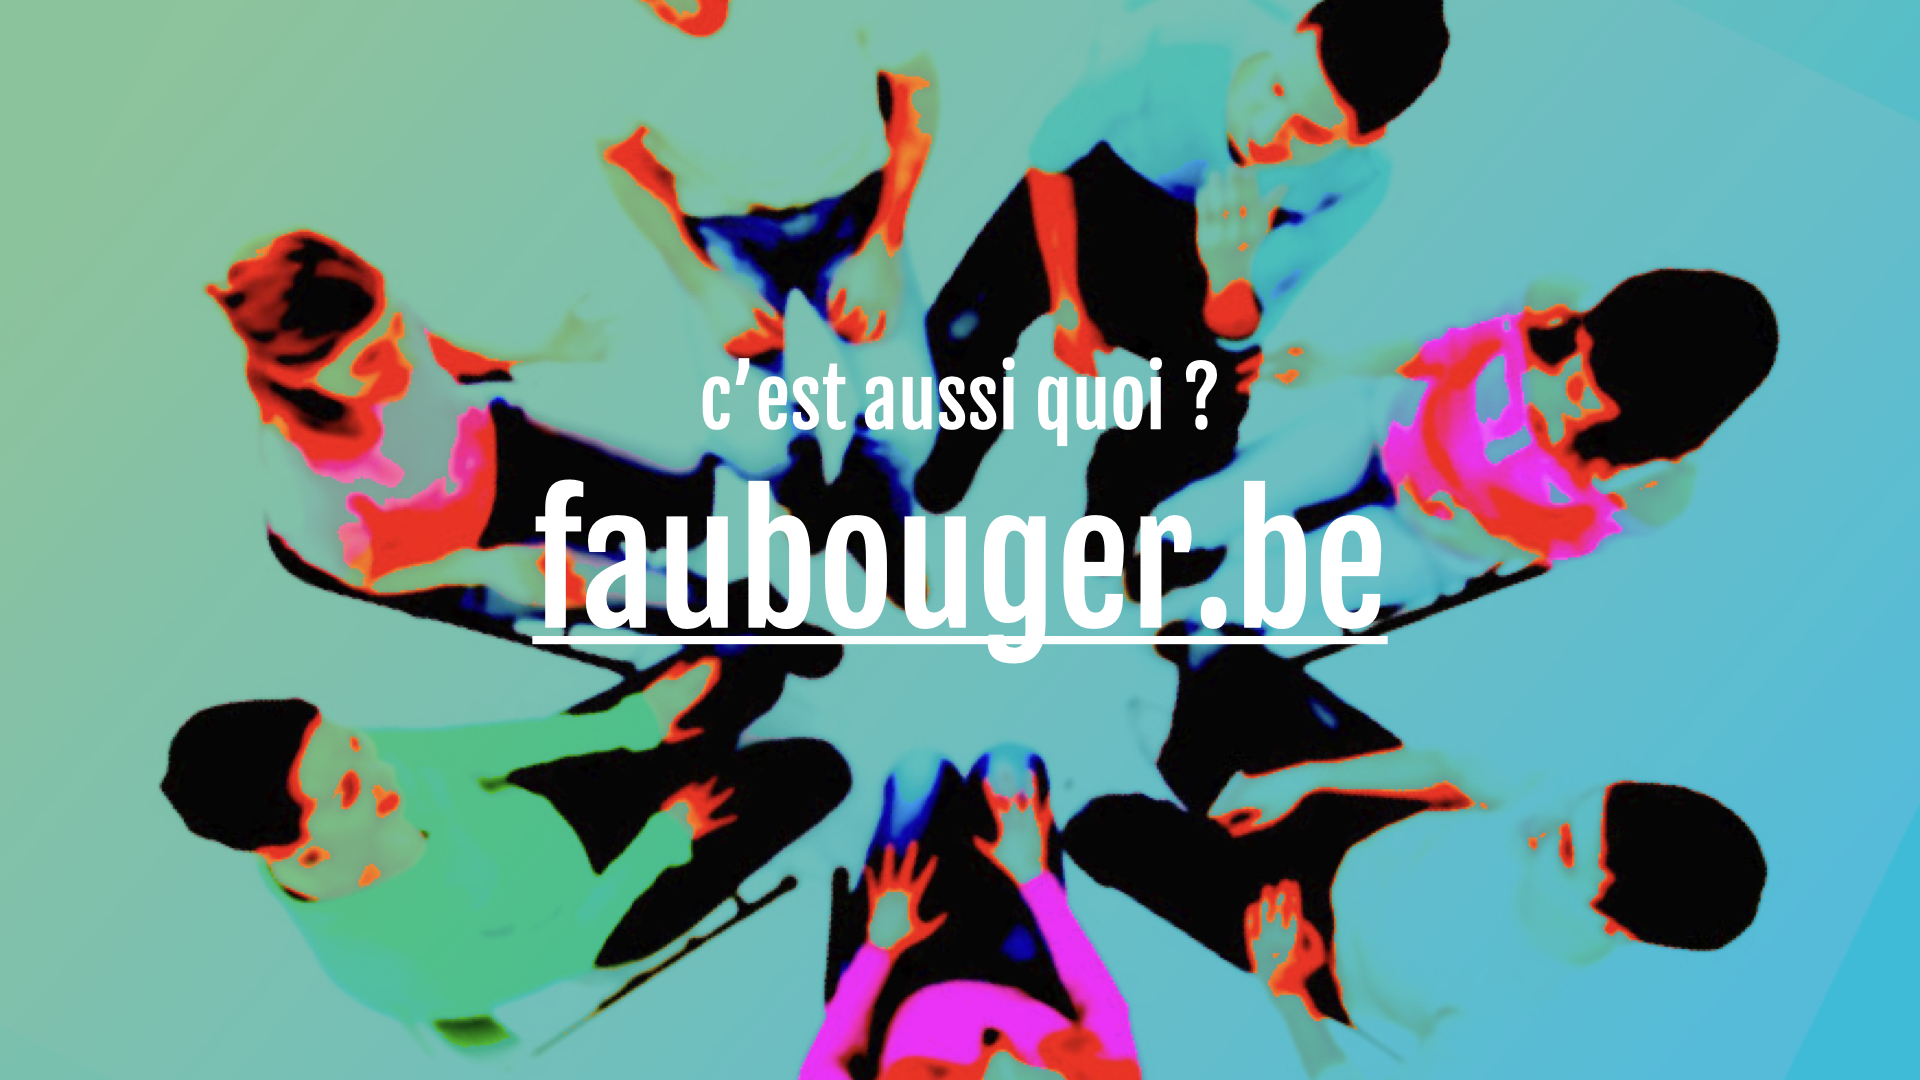 faubouger c quoi - 2.001.jpeg